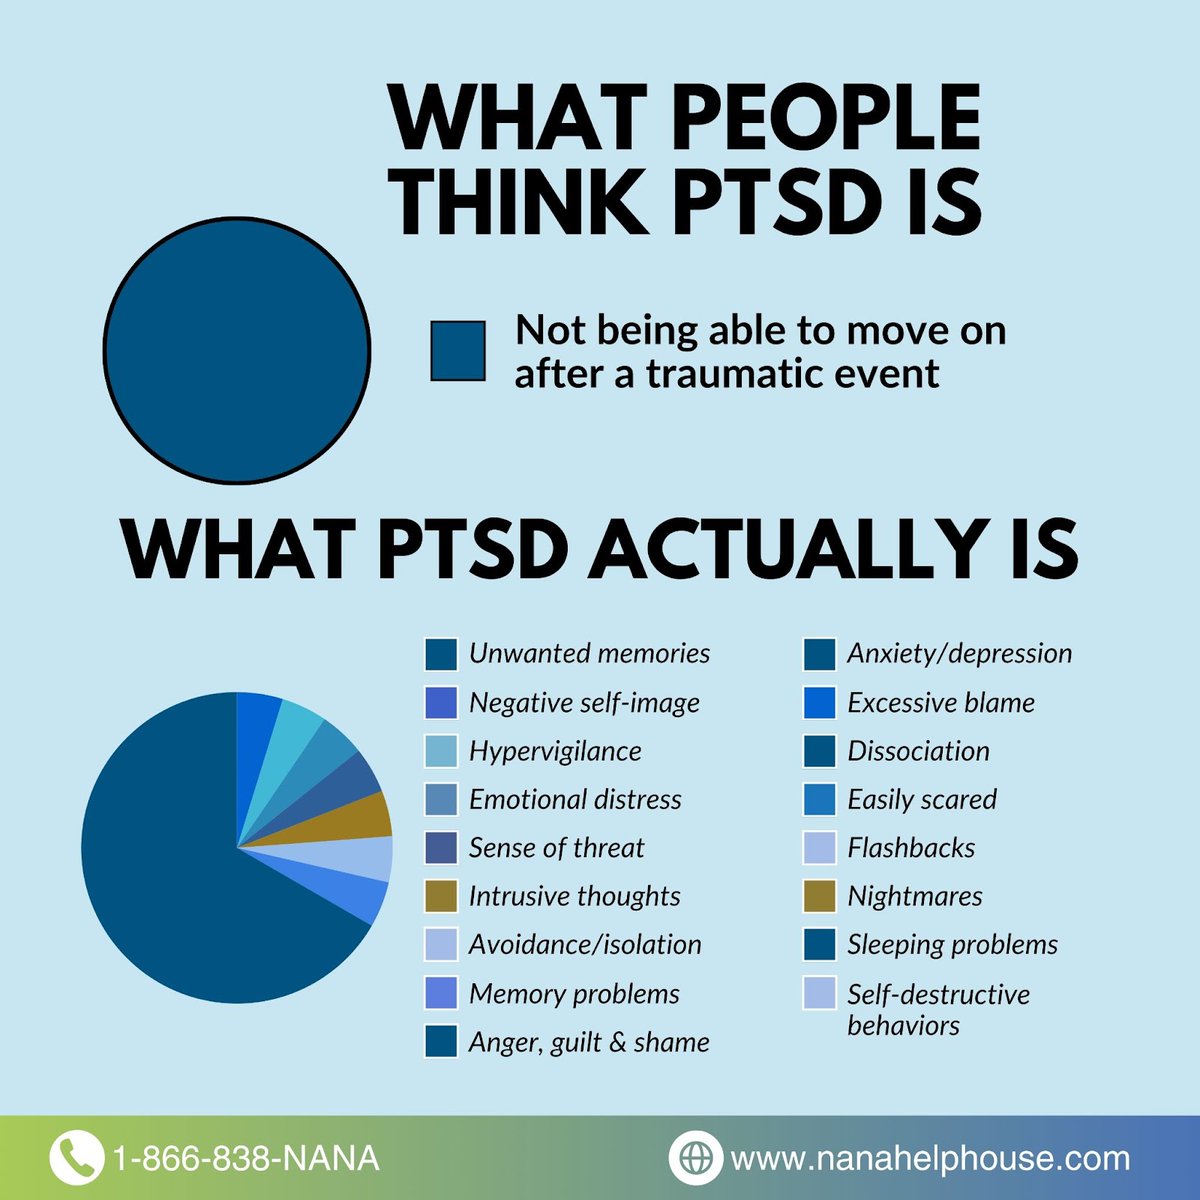 Have you ever had your PTSD dismissed? 😟
---
📞 Contact us now on 1-866-838-NANA & visit our website to take the first step towards a healthier, happier you. 
🌐✉️ nanahelphouse.com
.
#mentalhealthmatters #depressionawareness #breakthestigma #selfcare